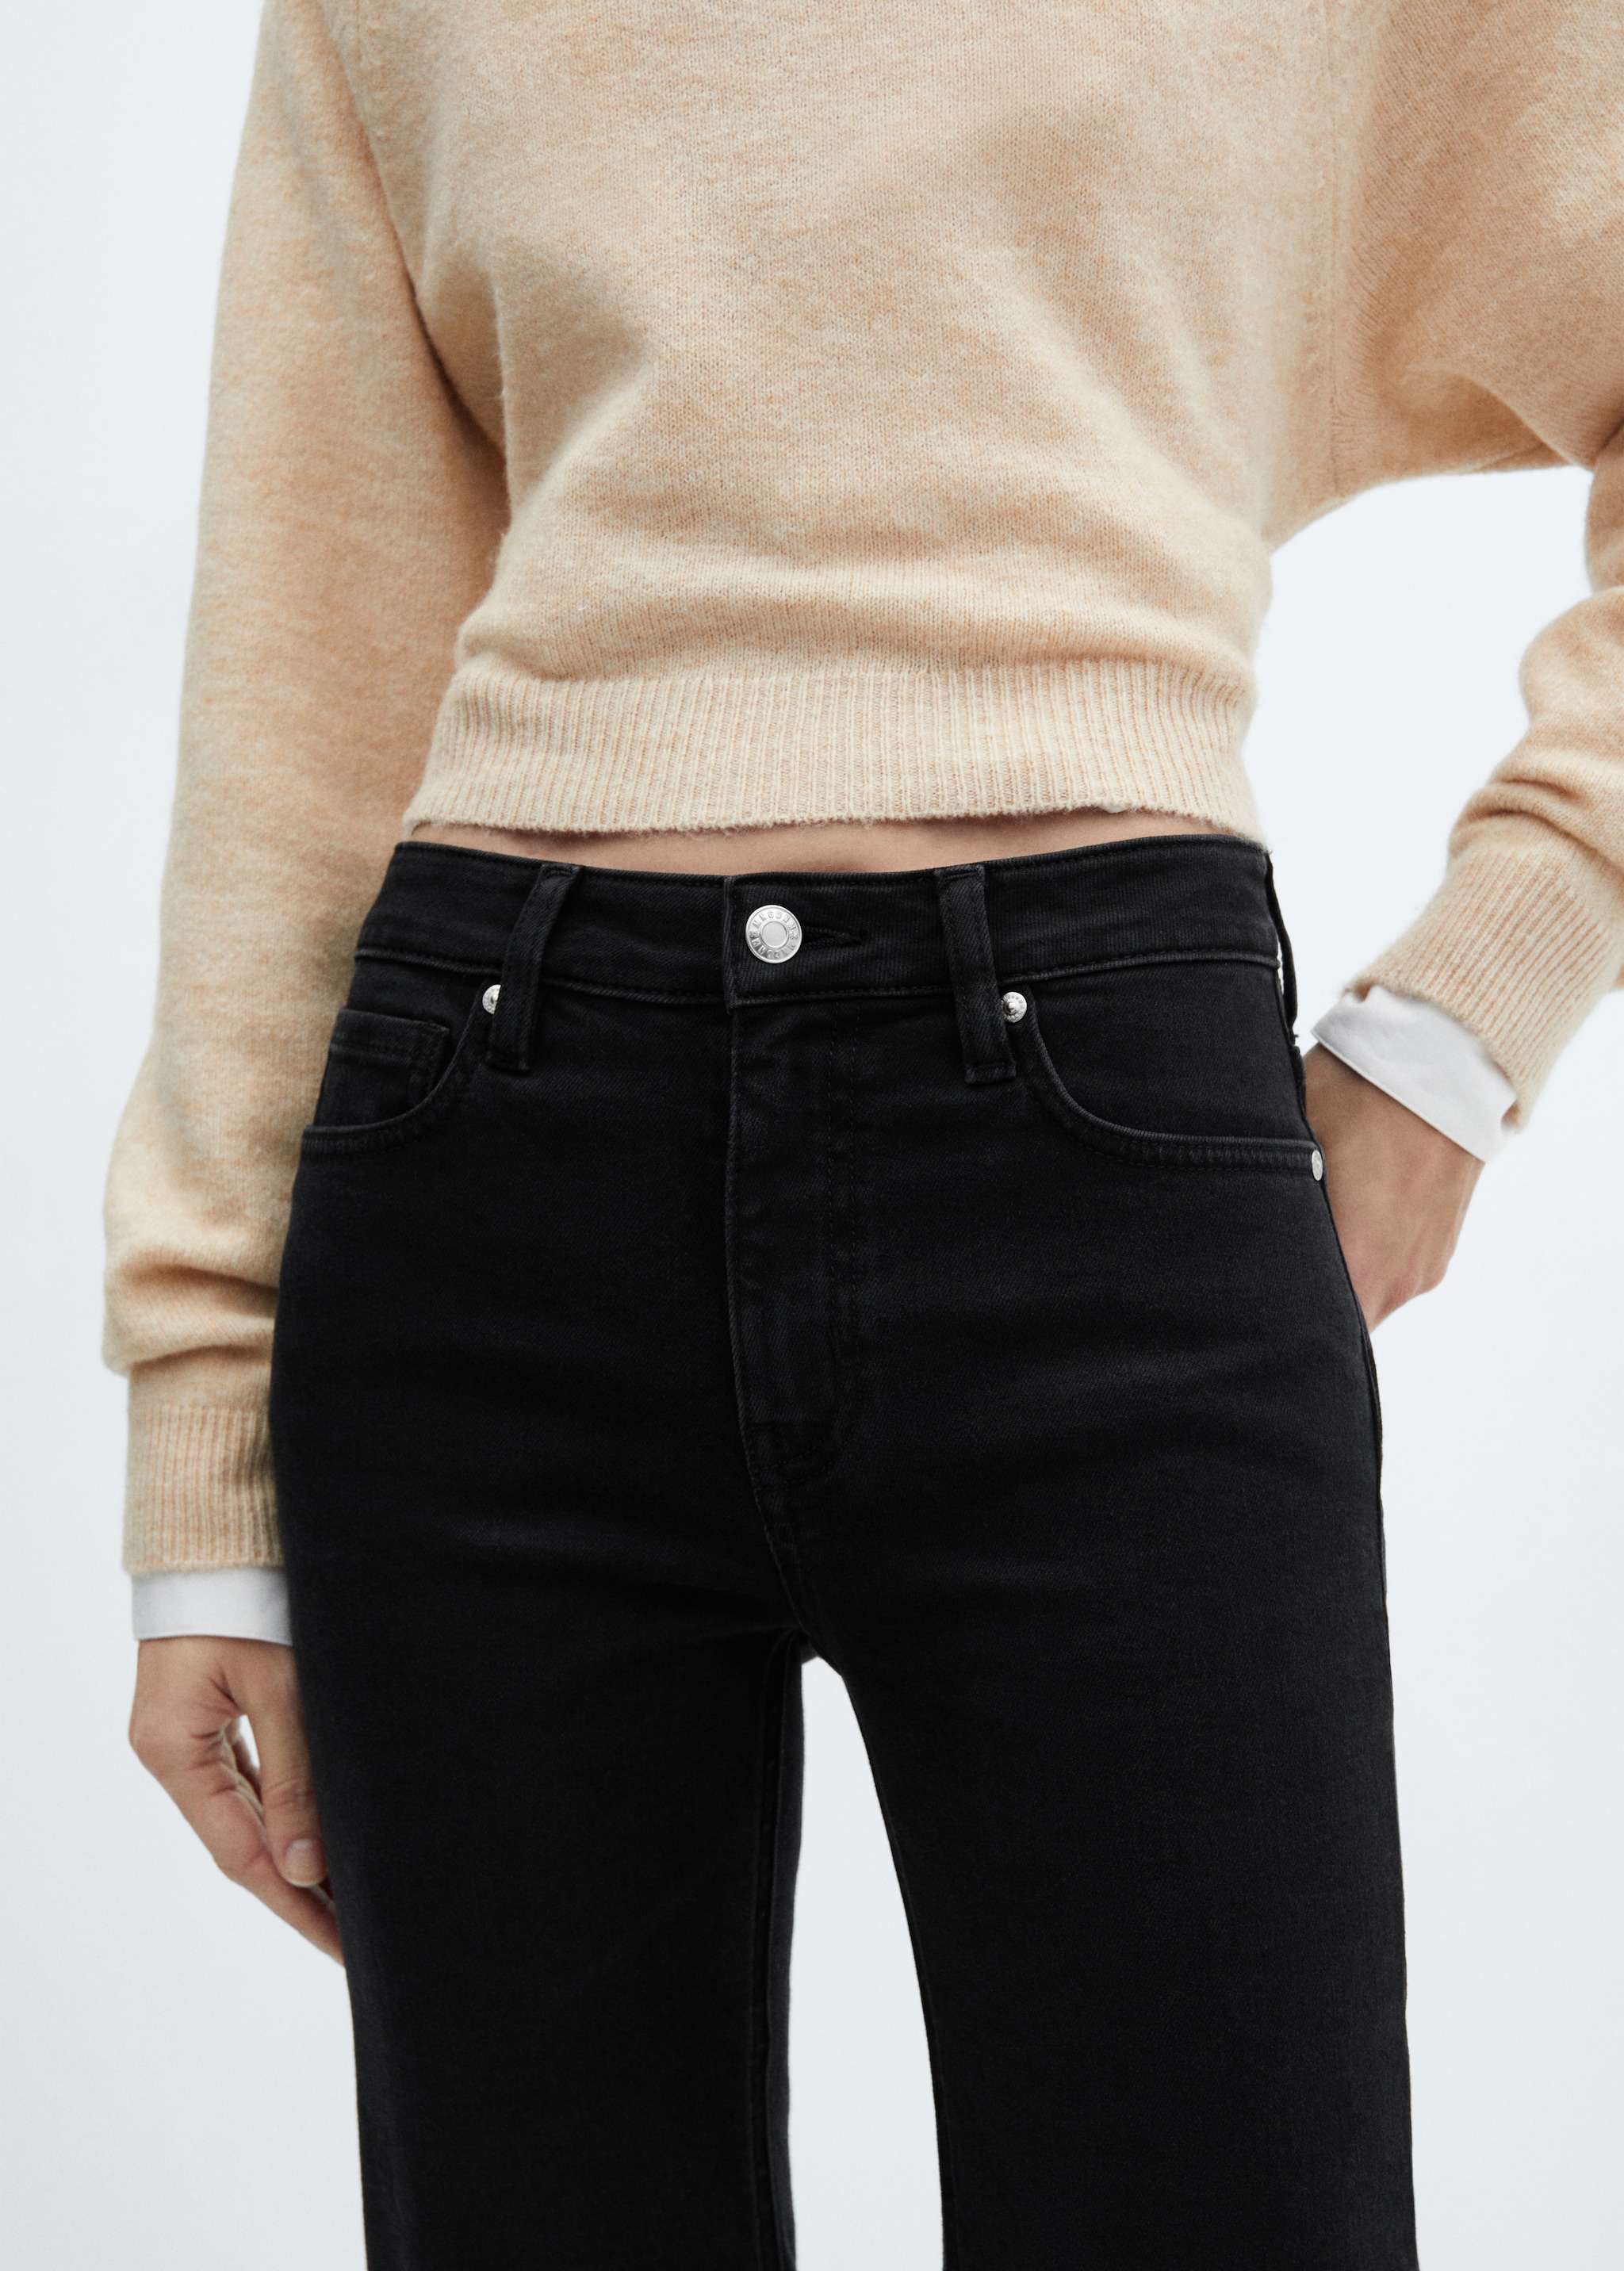 Jeans Sienna flare crop - Details of the article 4